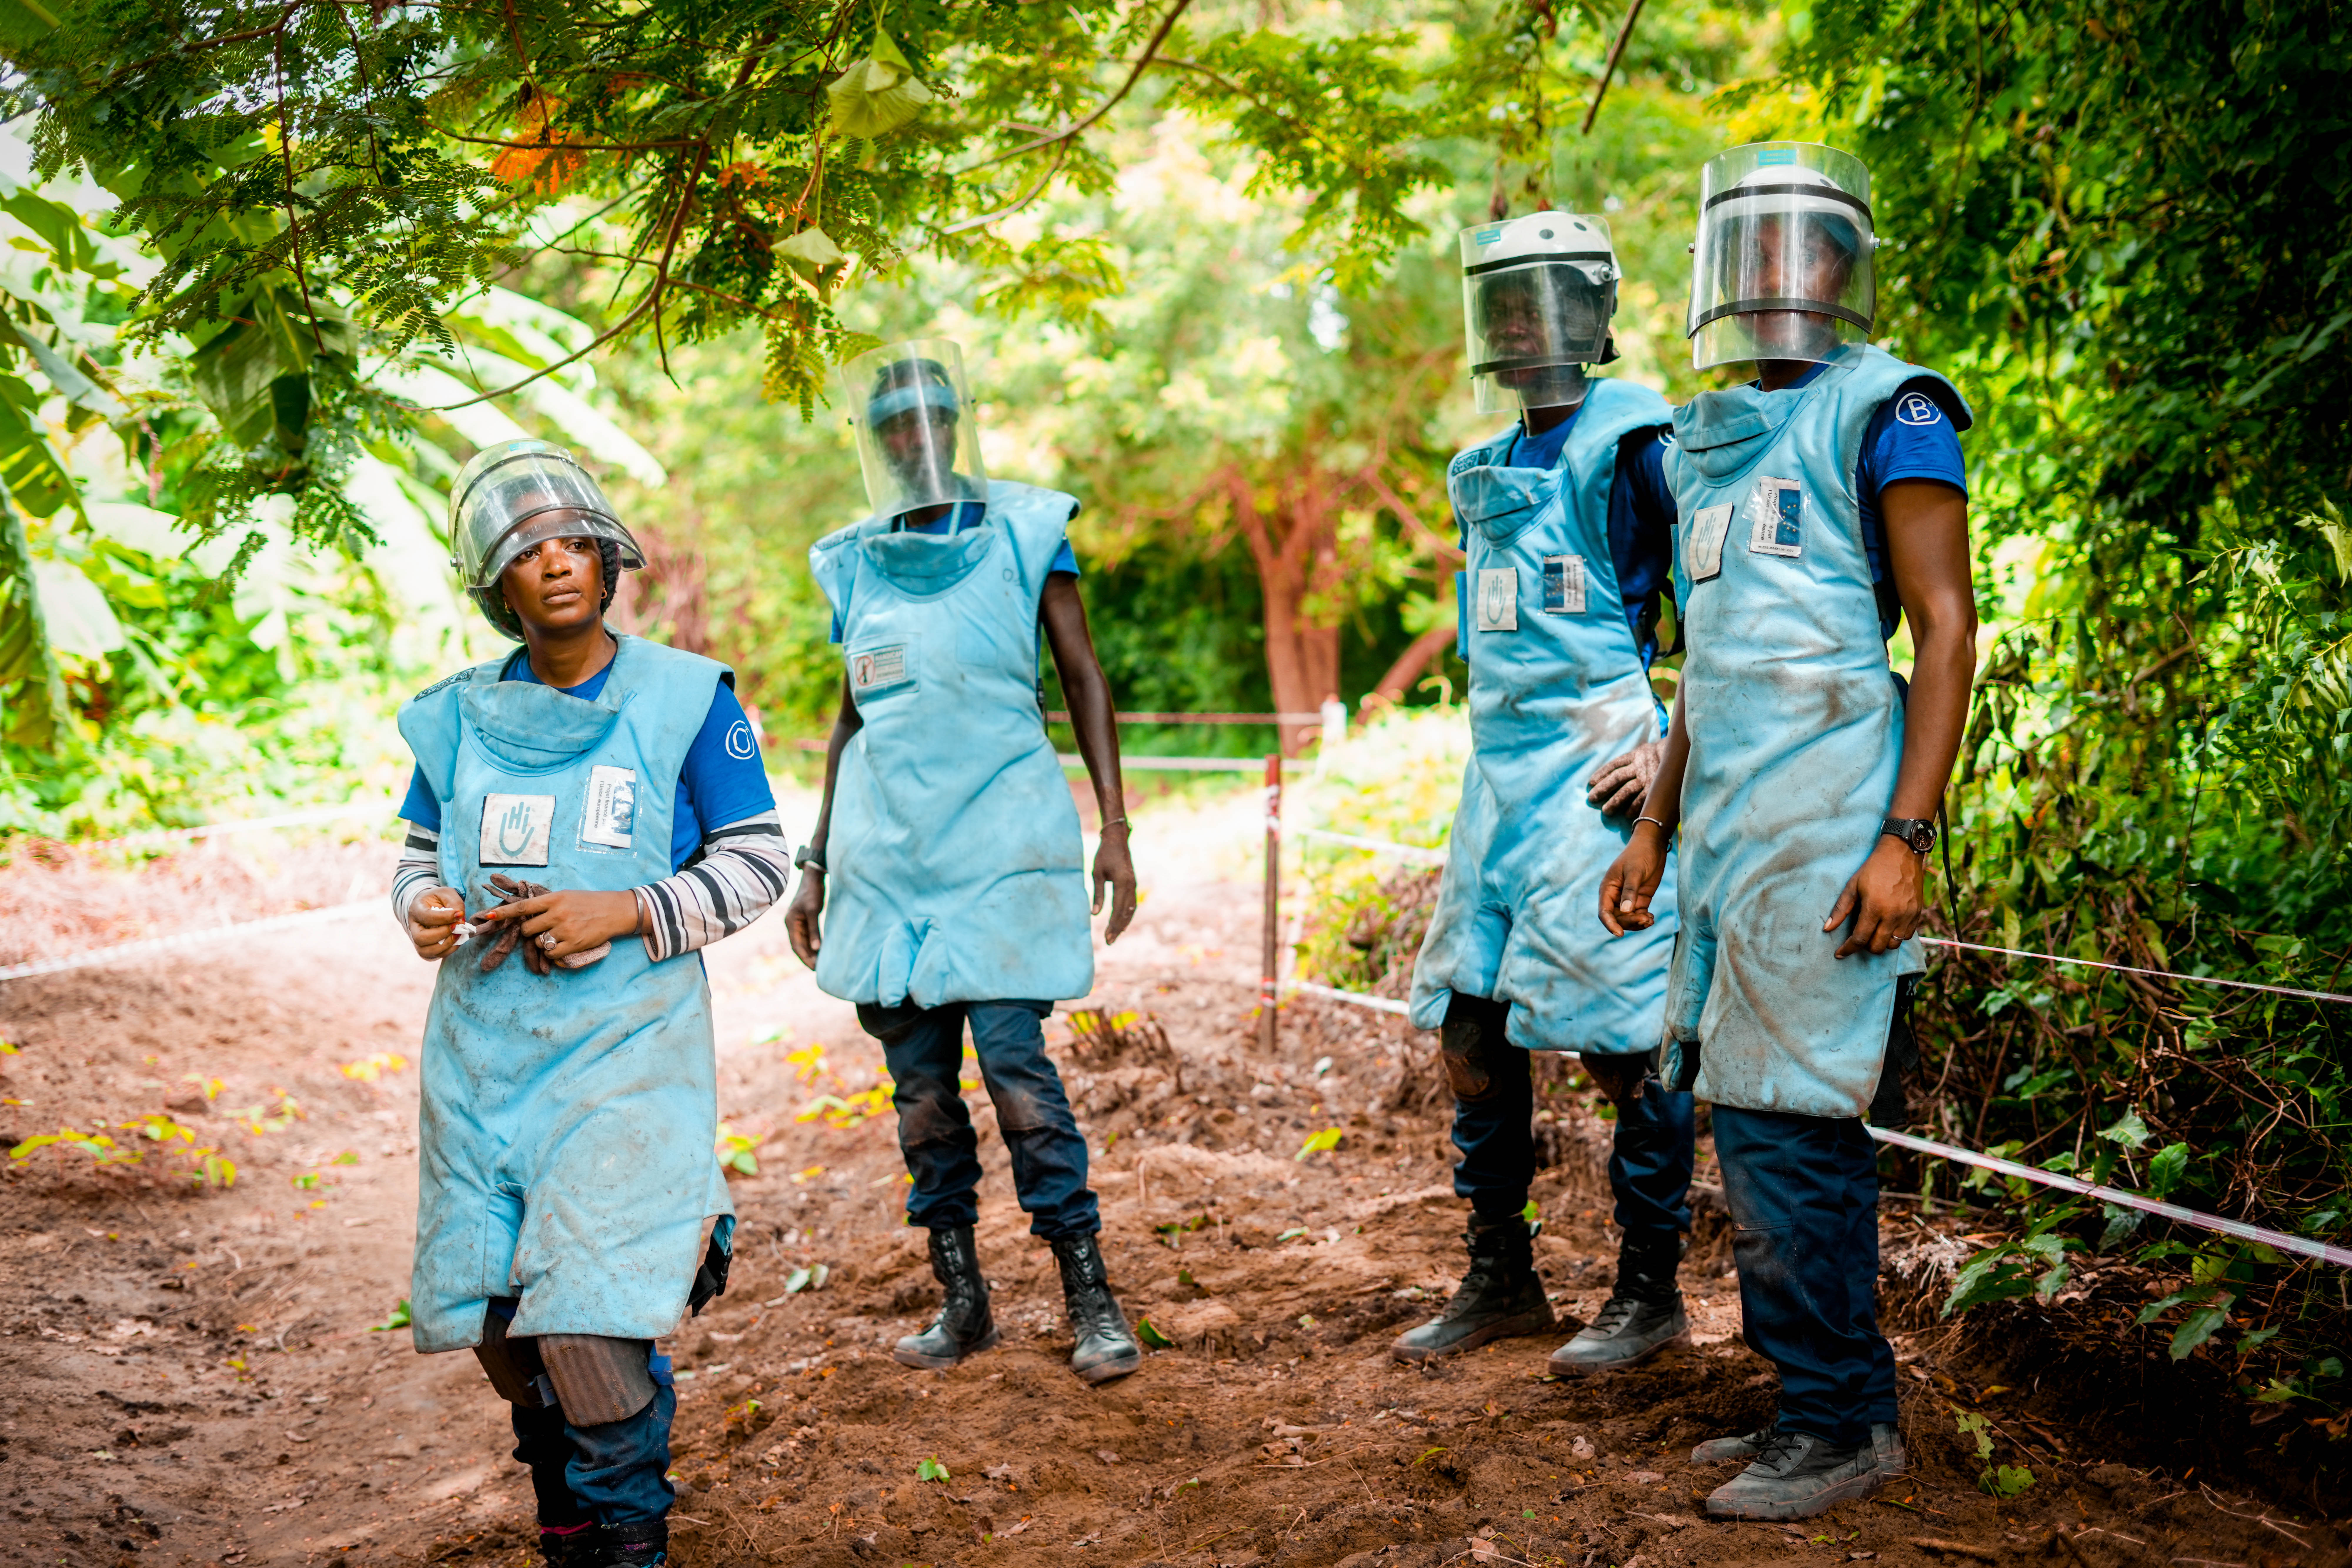 Four deminers in protective gear stand on a dirt track, surrounded by lush vegetation.